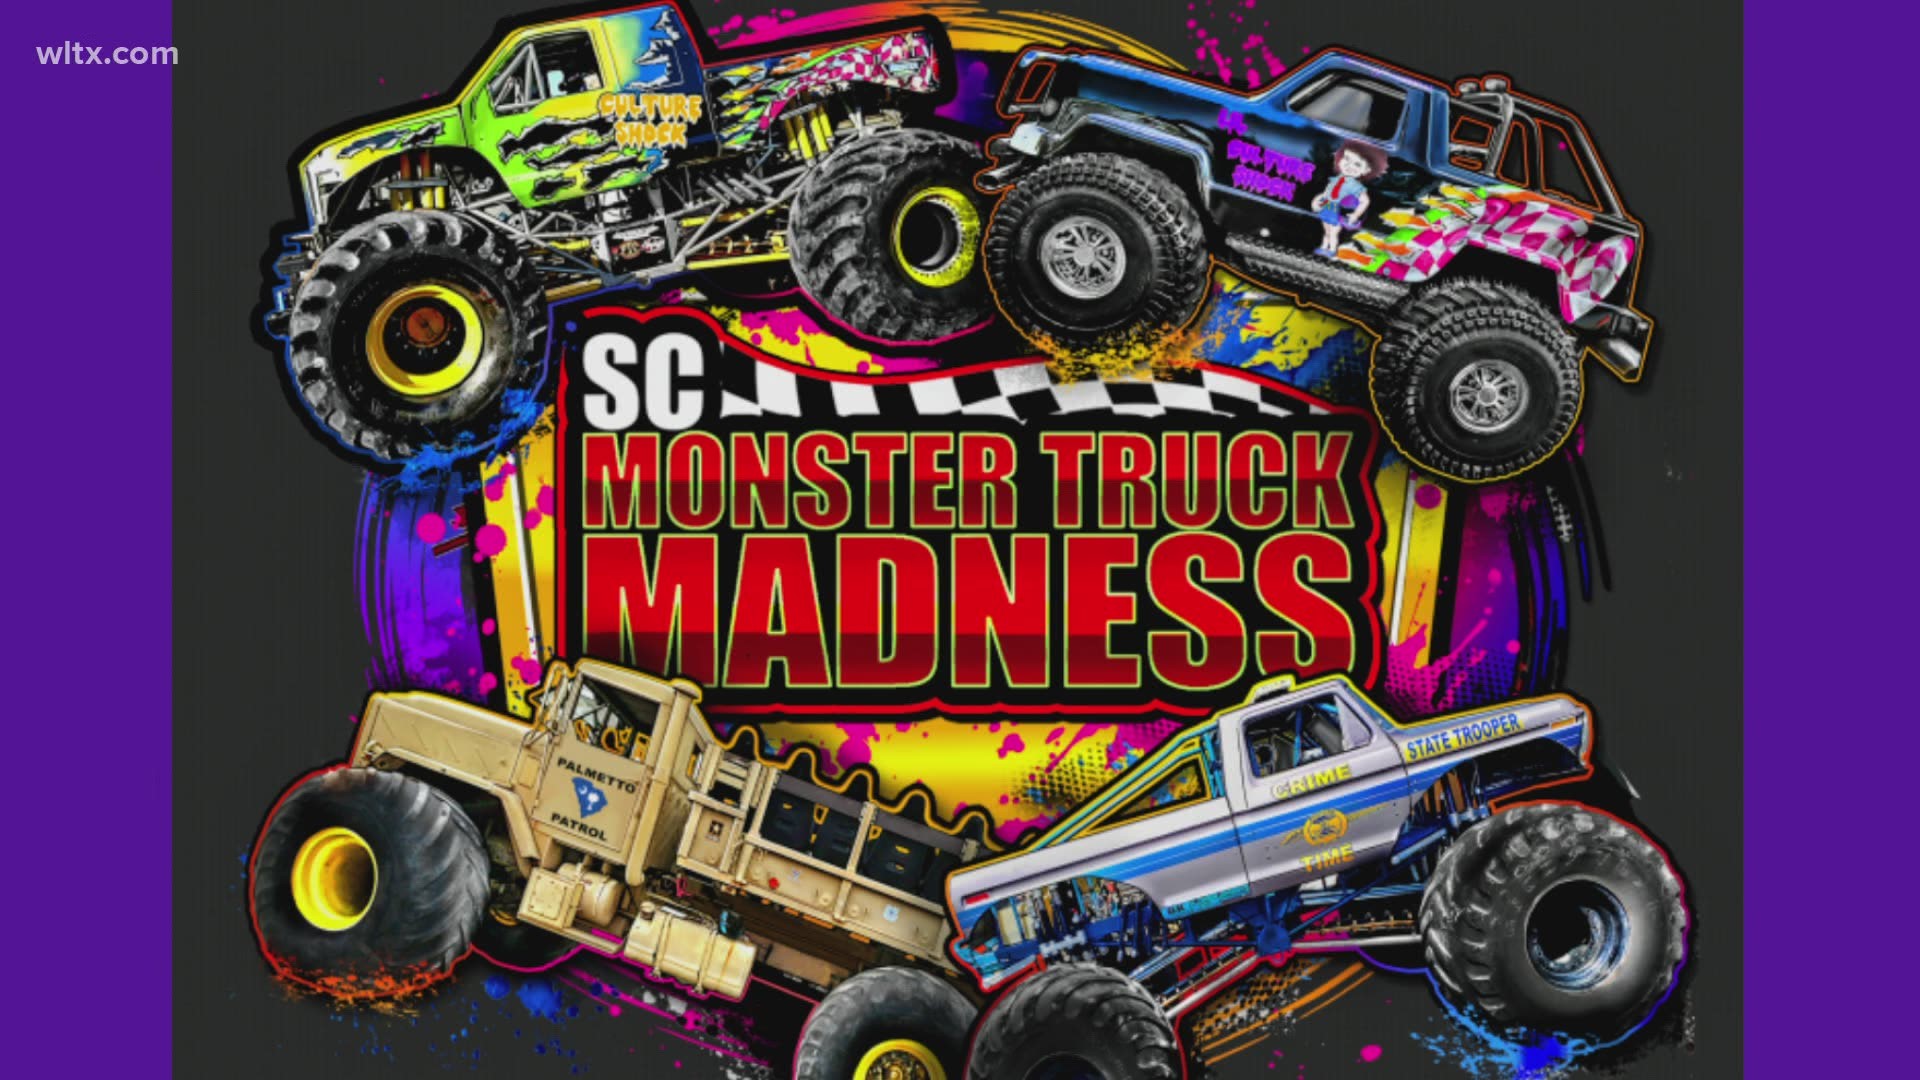 SC Monster Truck Madness is holding an event 7 p.m. Saturday, April 17, at the Mudplex in Neeses.